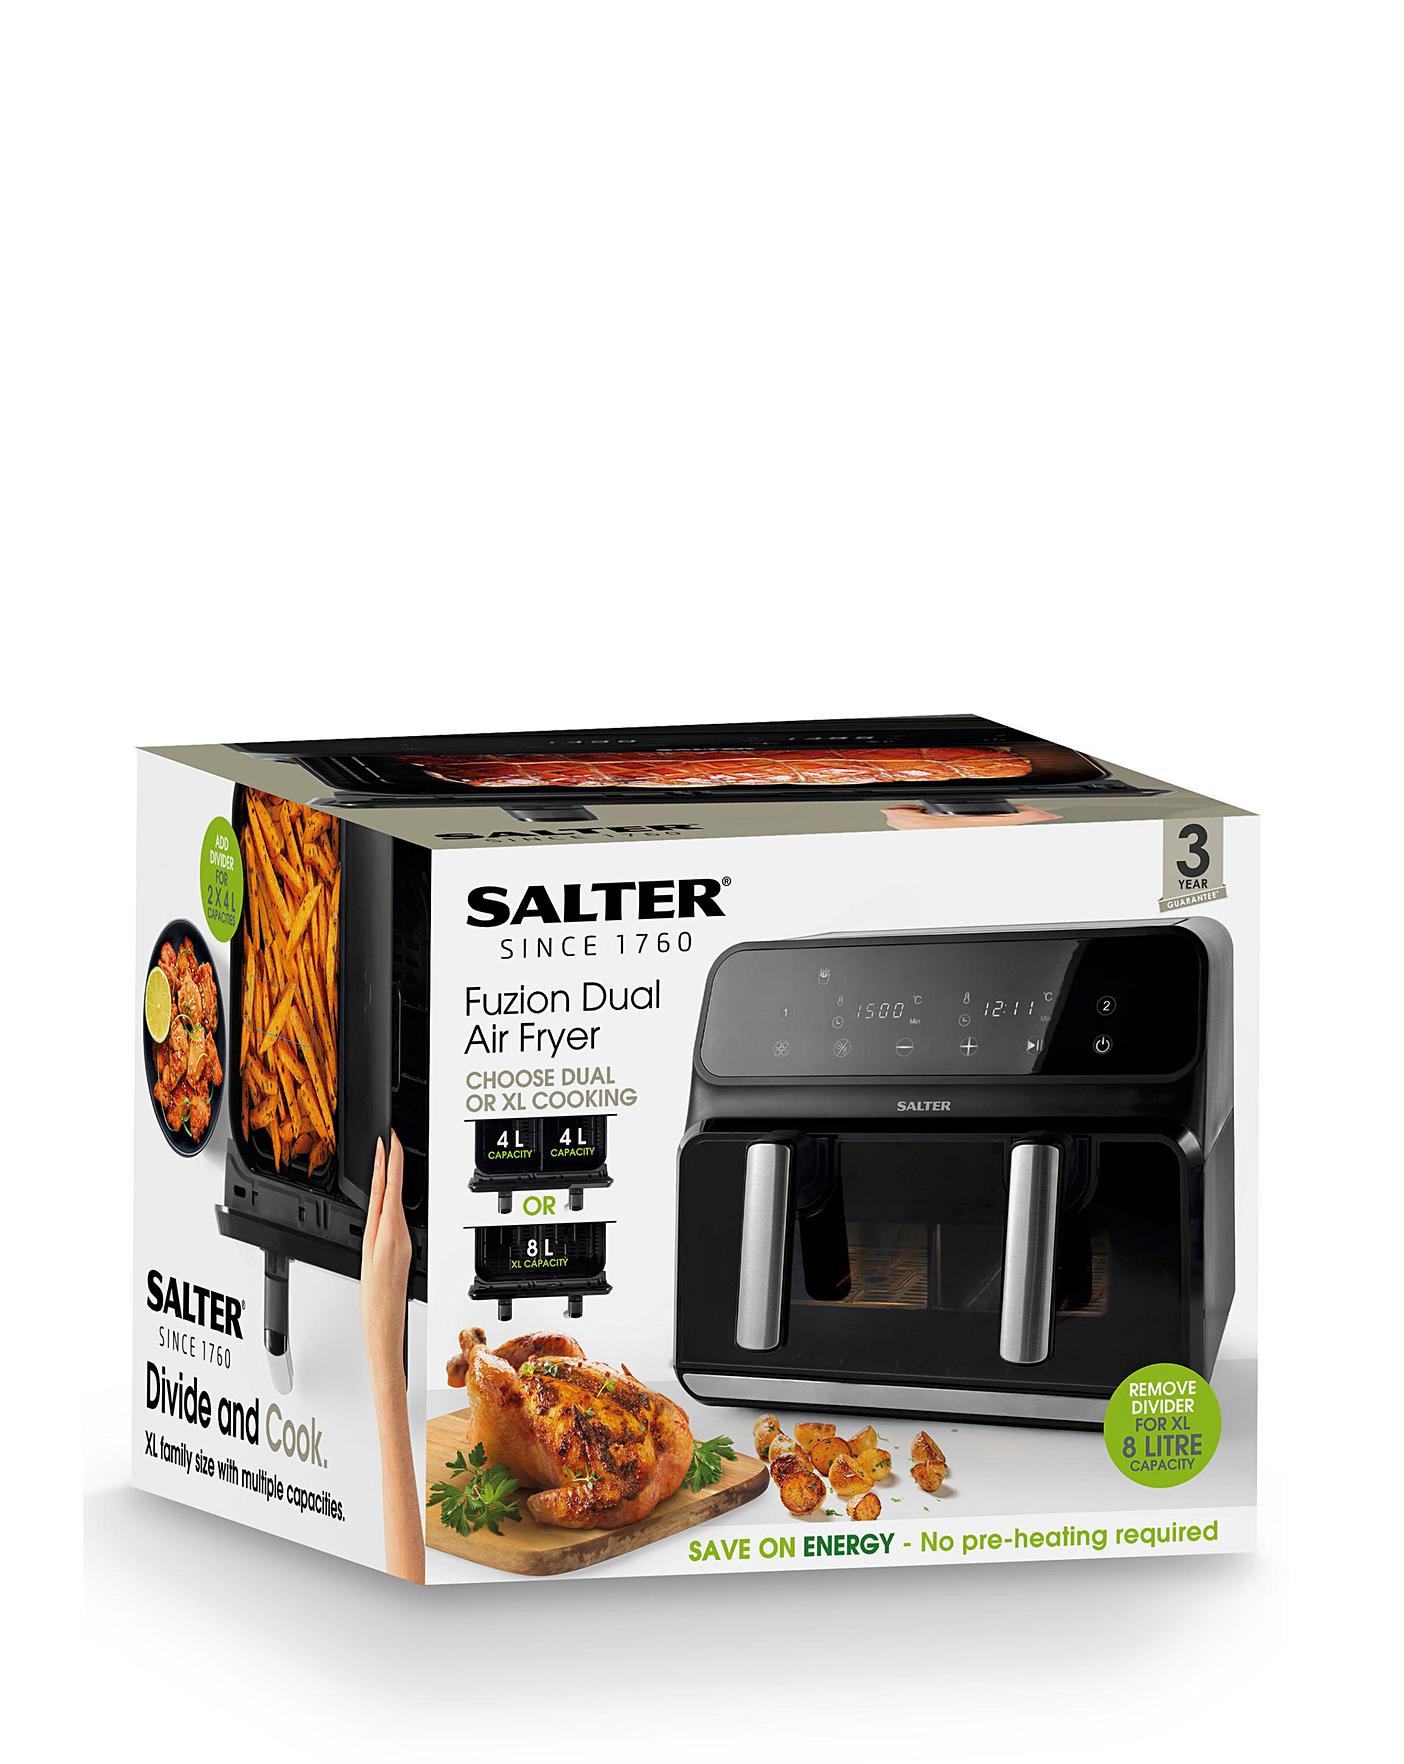 Salter Dual Air Fryer makes cooking easy